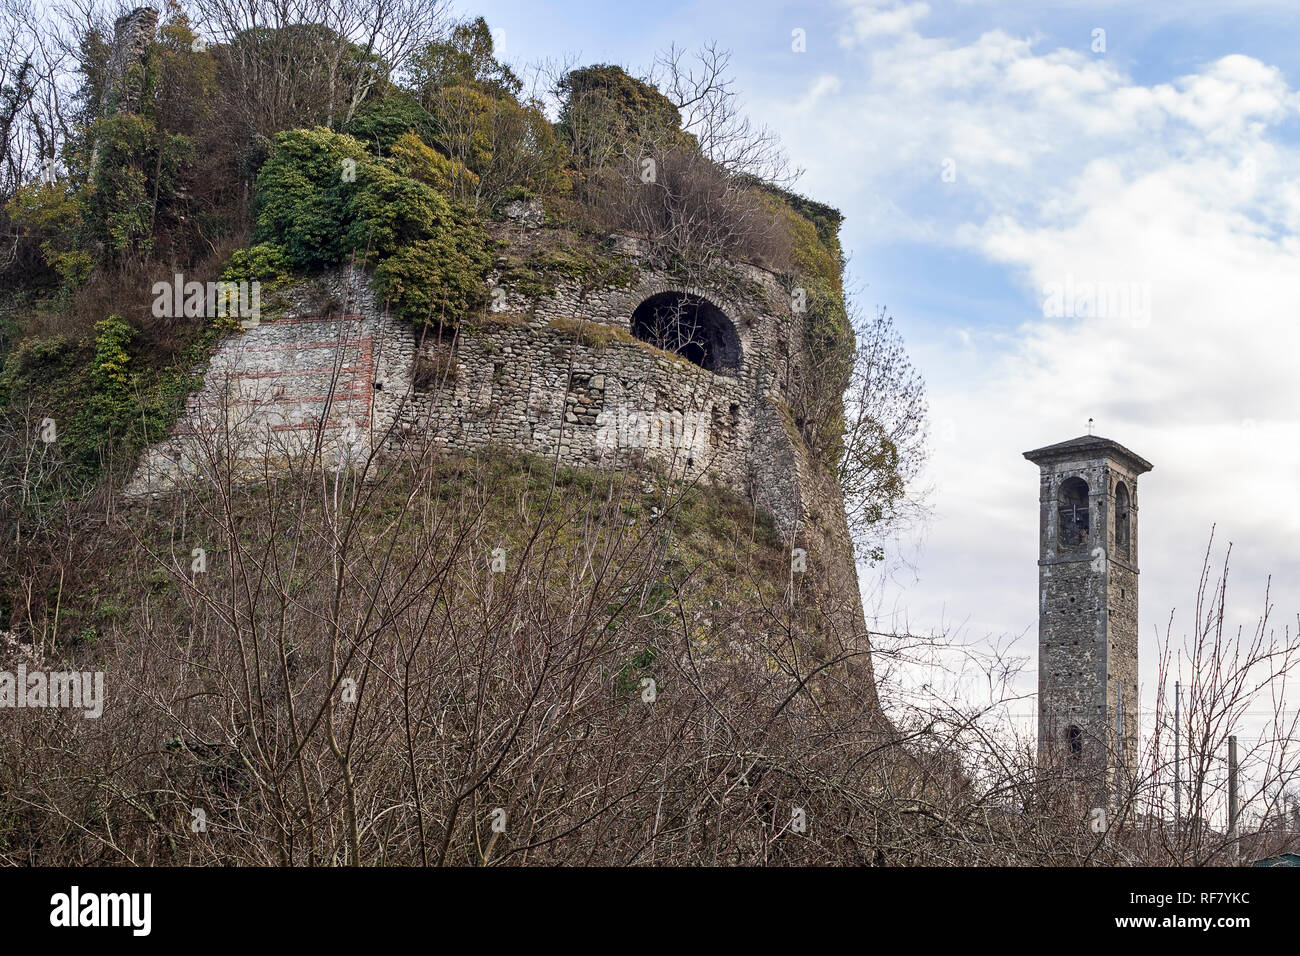 Part of the old Malnido castle ruins in Villafranca in Lunigiana, and Saint Nicolo church tower. Removal of vegetation work in progress January 2019. Stock Photo